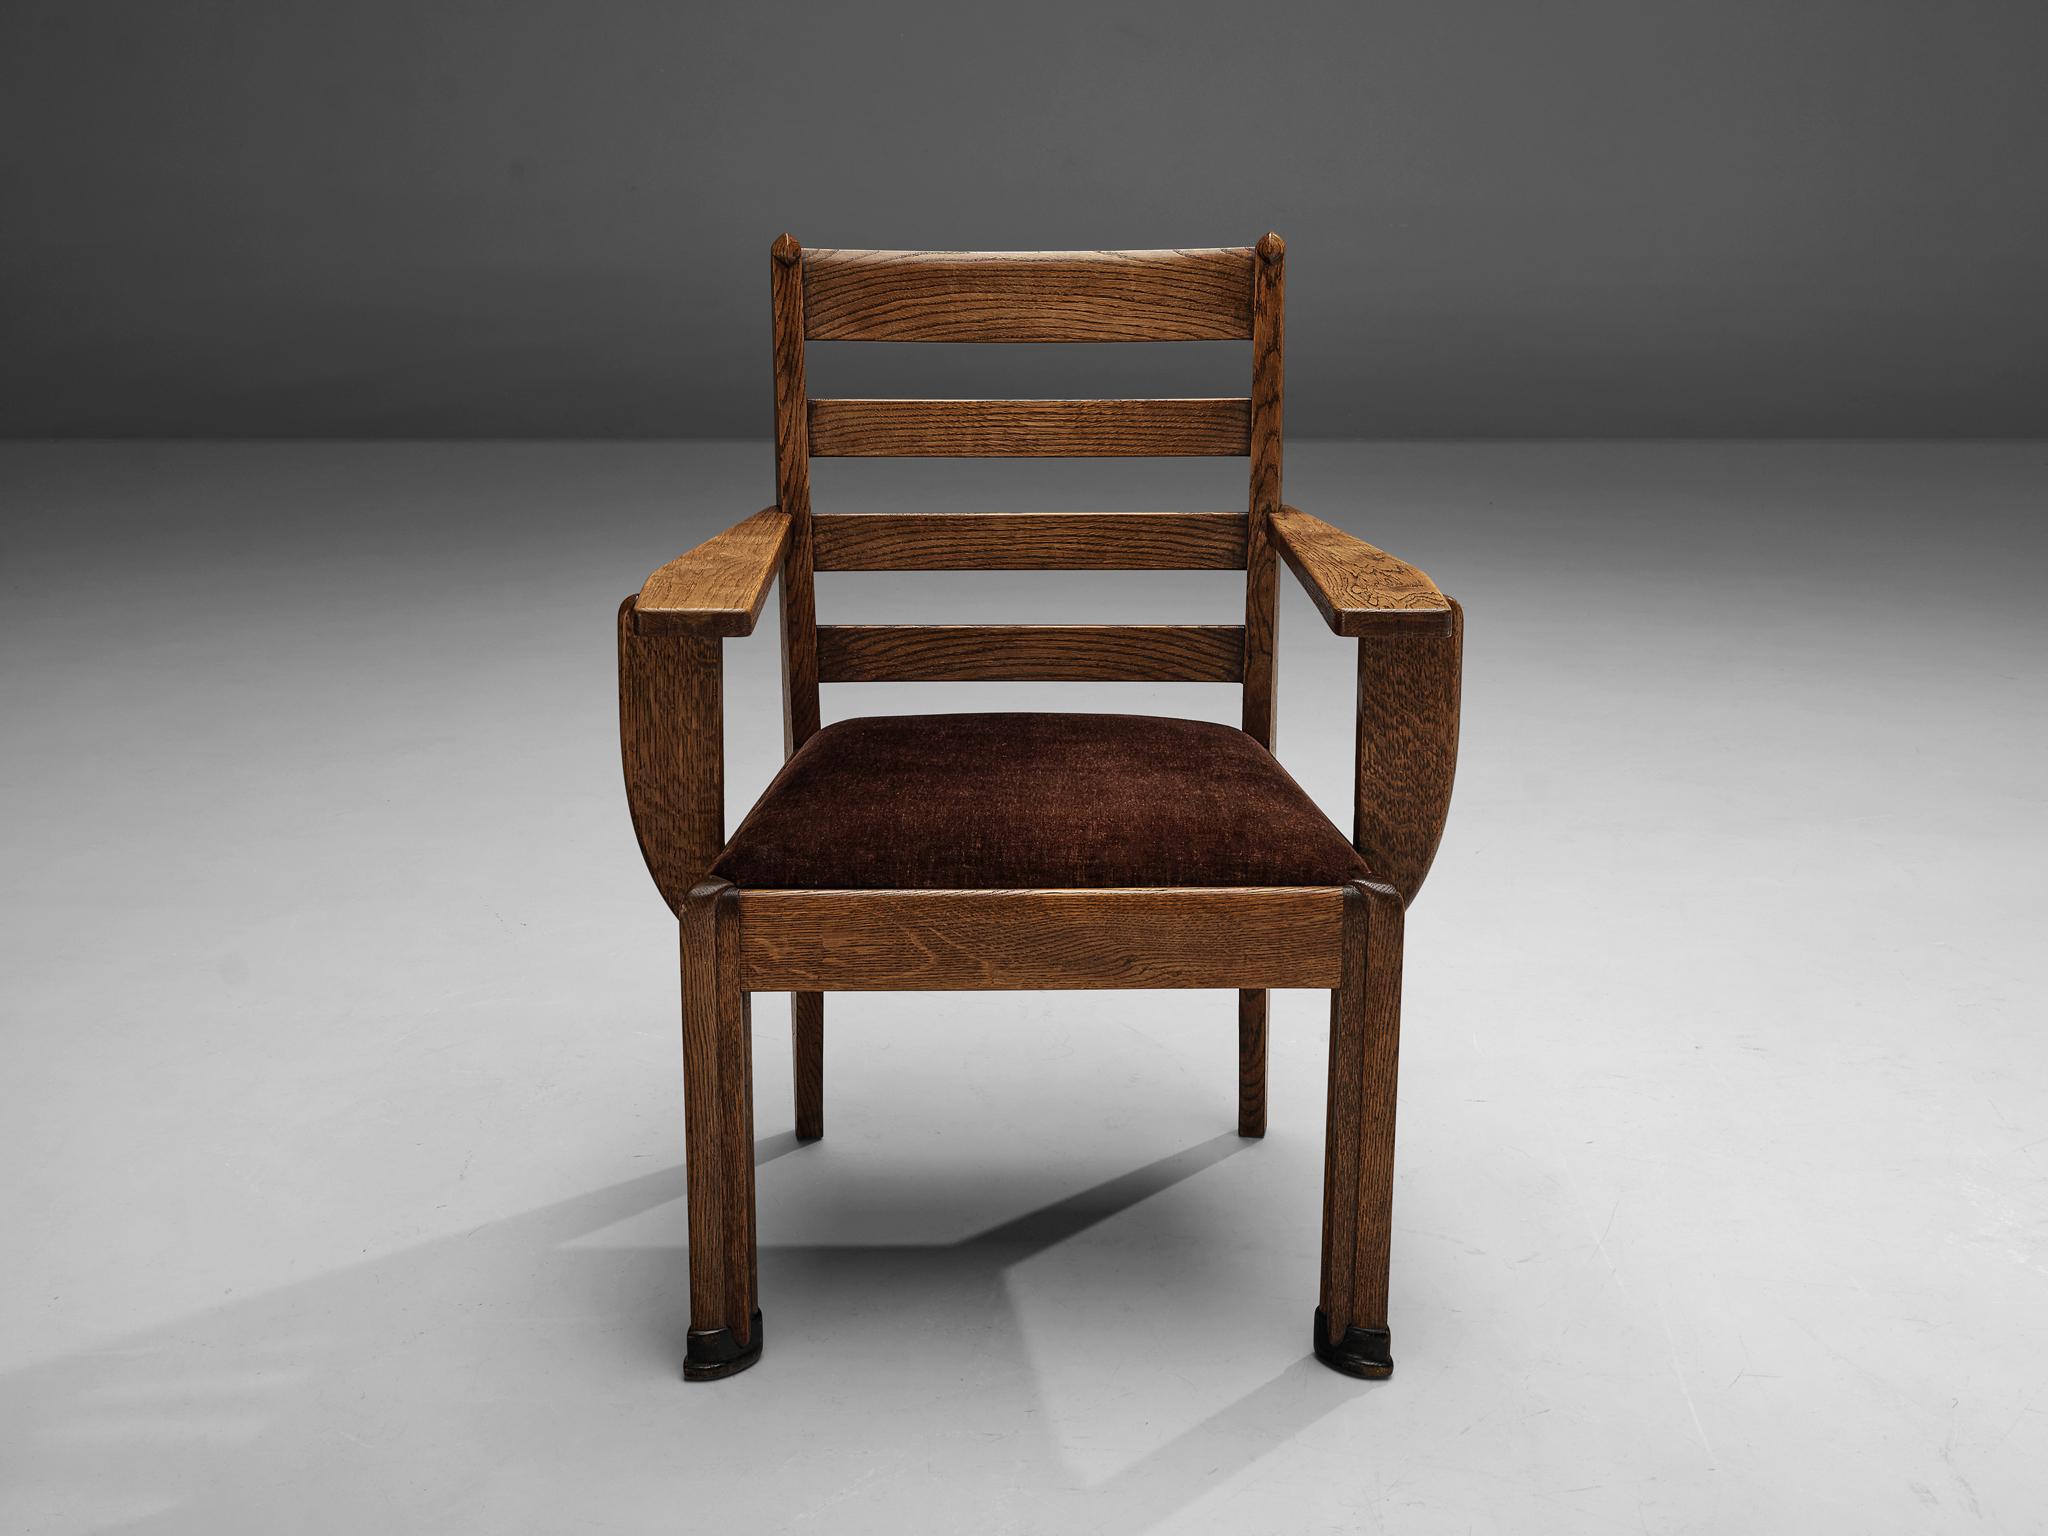 Art Deco chair, stained oak, Europe, 1920s

Beautiful art deco chair created in stained oak. The darkened oak has stunning features and accents from the wood grain. Overall, the chair has a sculptural feel which is emphasized by the clean lines of